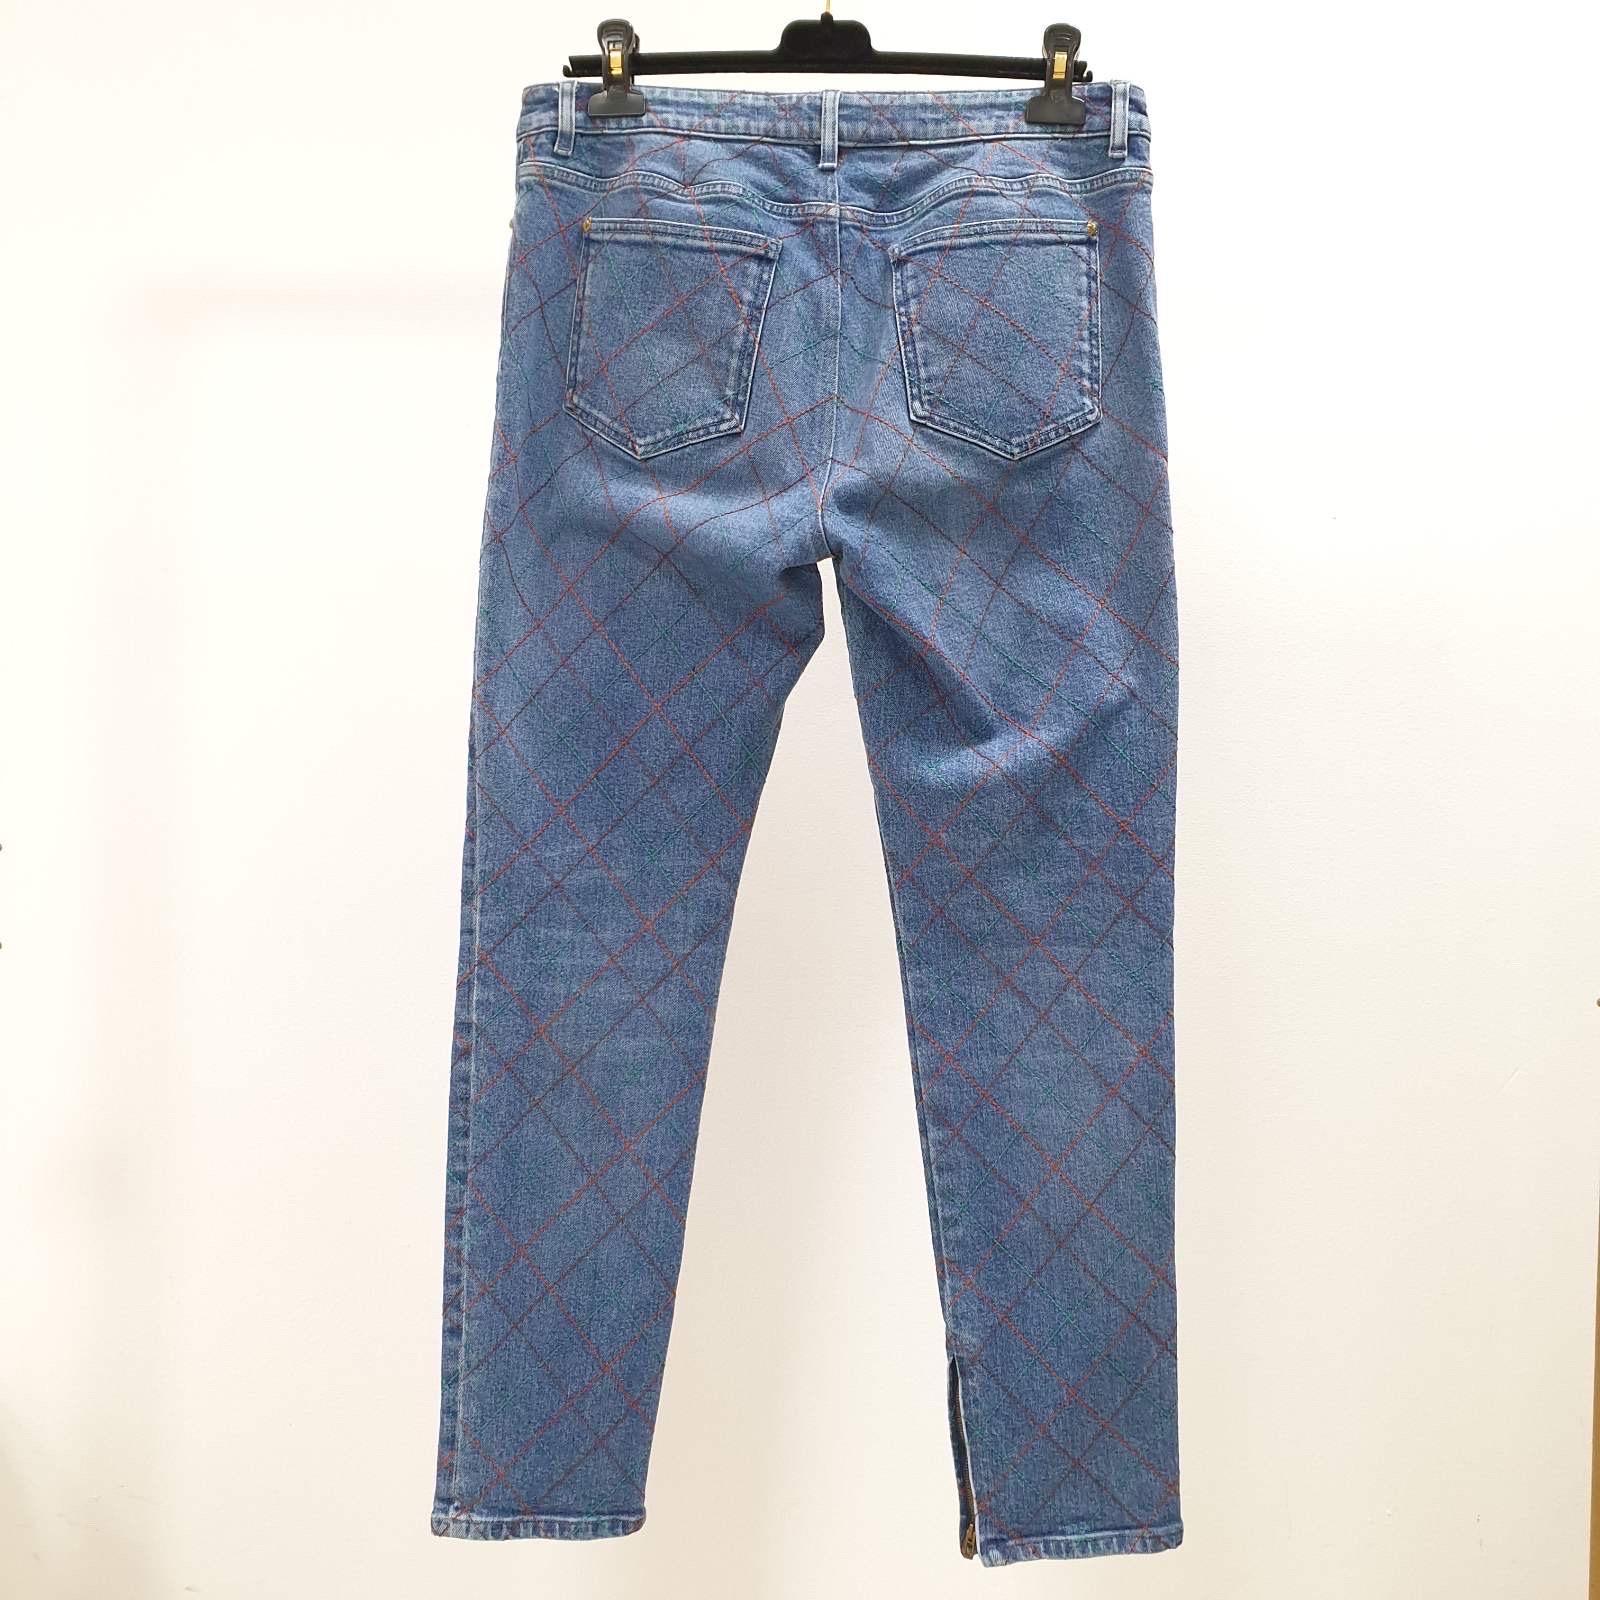 Timeless classic jeans by CHANEL with back pockets
Perfect fit very comfortable to wear great fit
The most beautiful and coolest golden lion buttons
Zipper at the bottom of the trouser leg
Limited jeans by Chanel no longer on sale, rarely